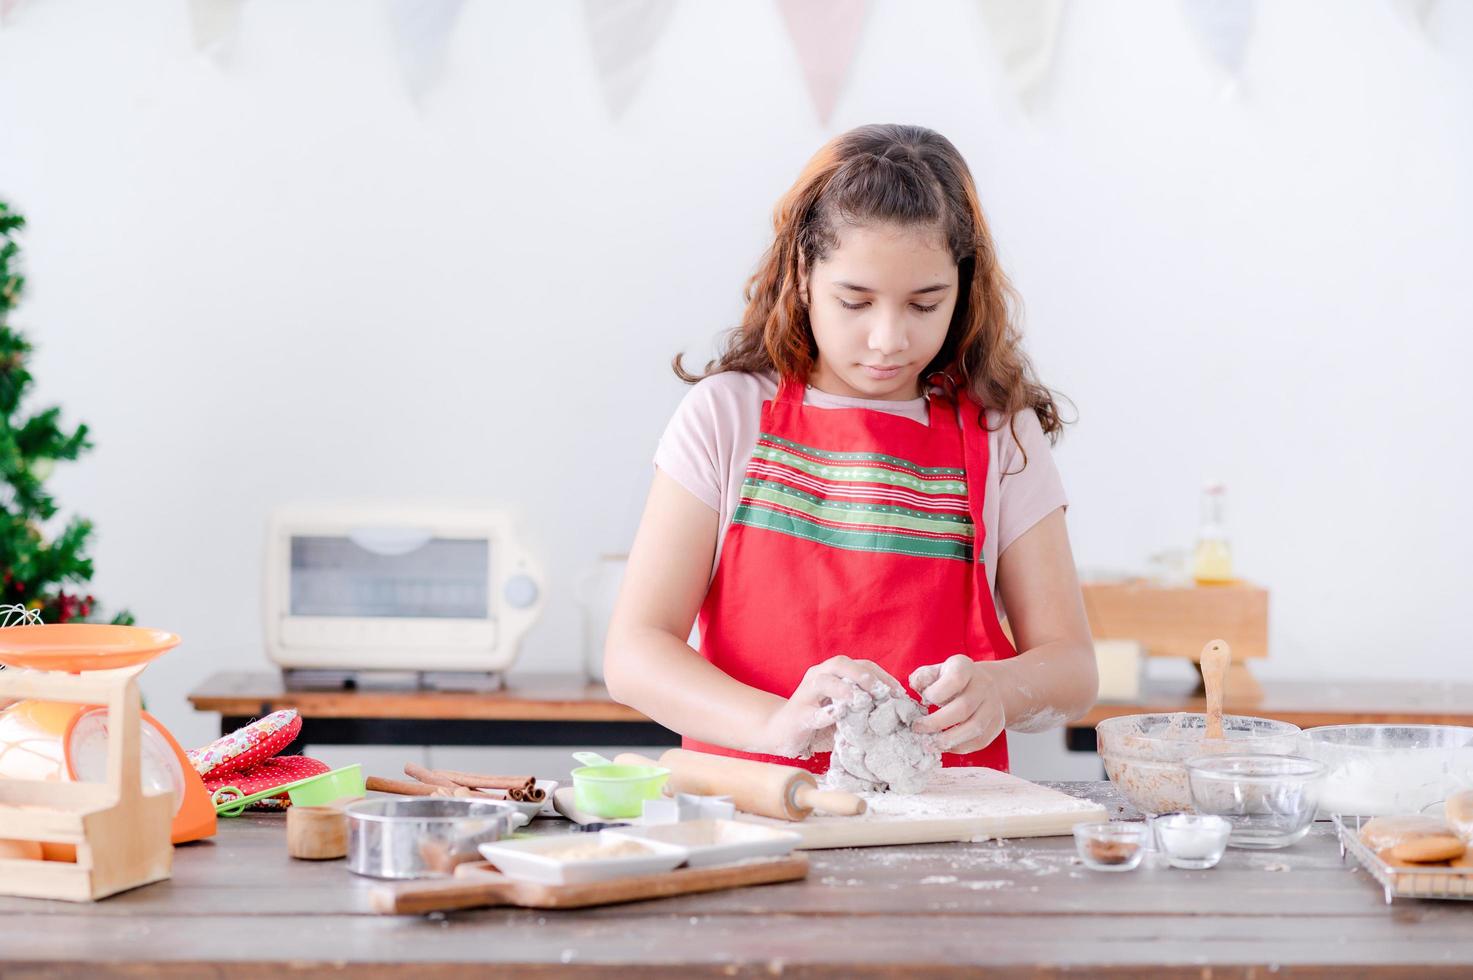 European girls prepare tools and ingredients for making gingerbread during Christmas and New Year celebrations photo